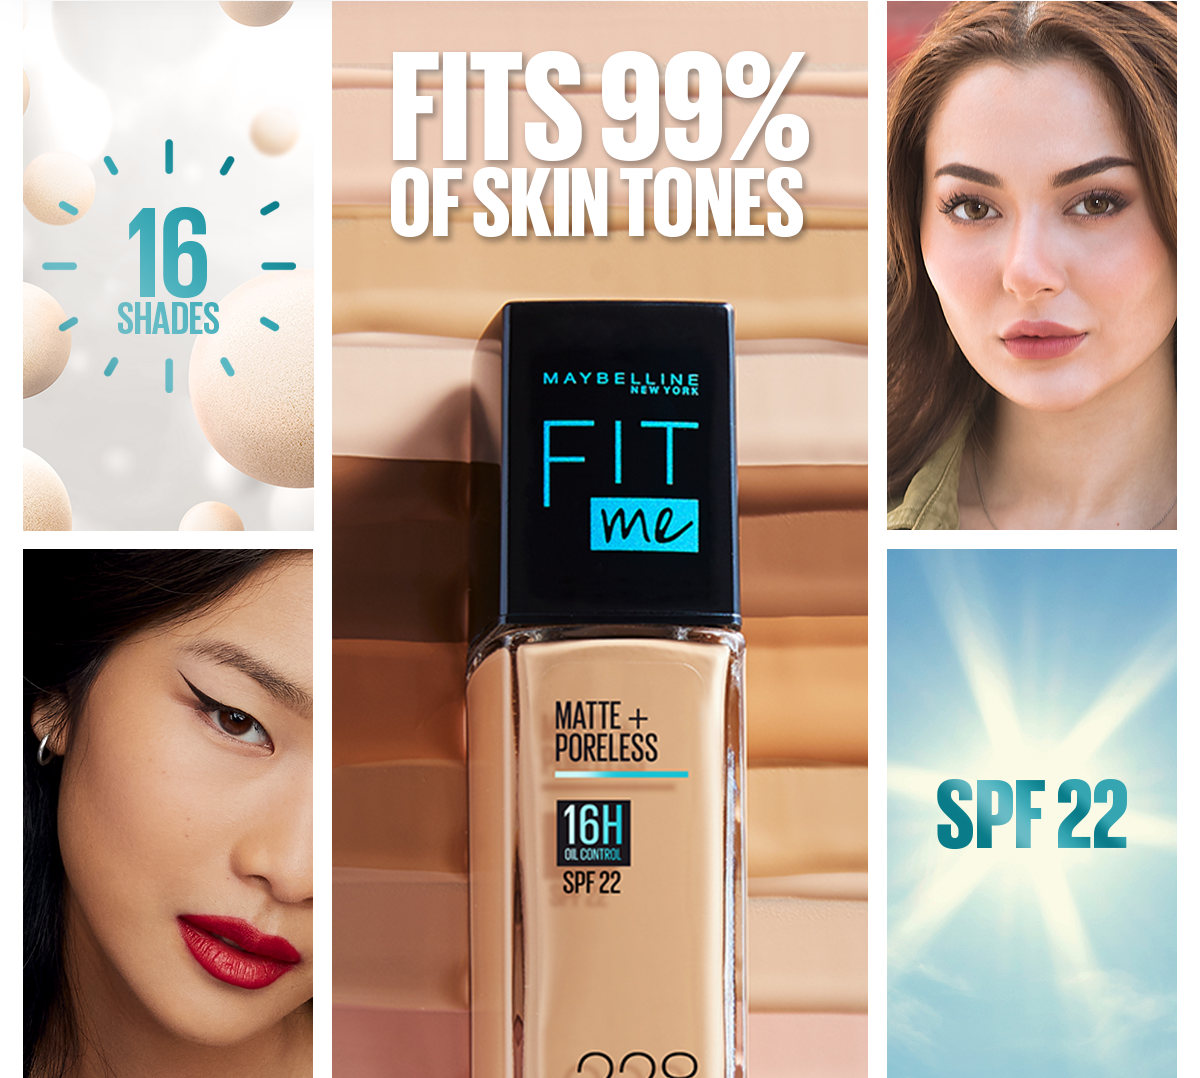 Maybelline Ny New Fit Me Matte + Poreless Liquid Foundation Spf 22 - 118 Light Beige 30Ml - For Normal To Oily Skin